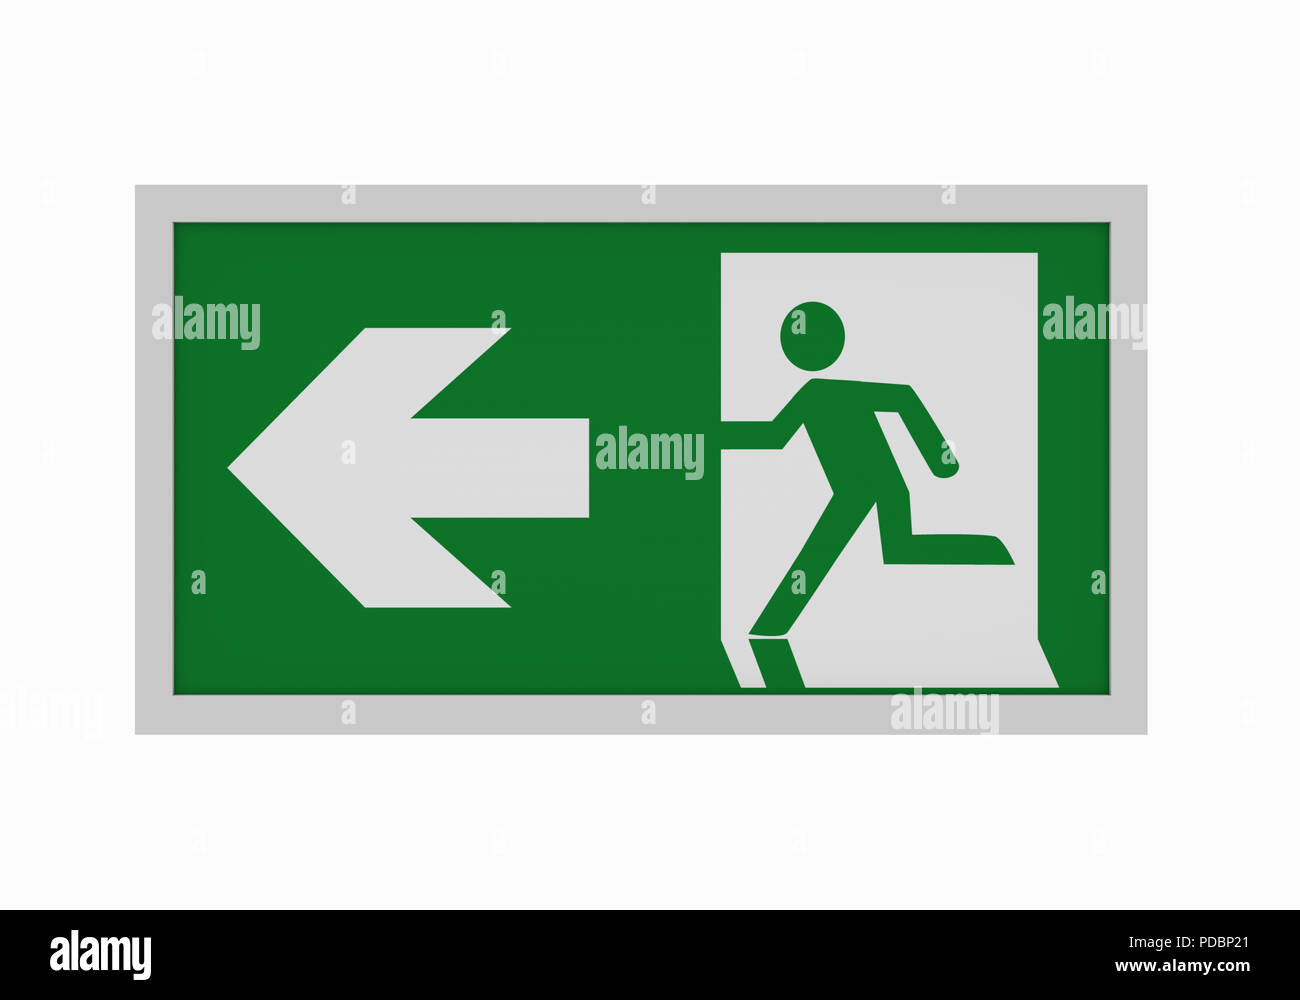 Text Sign Fire Exit Emergency Exit after Fluro ASR a1.3 Emergency Rescue 